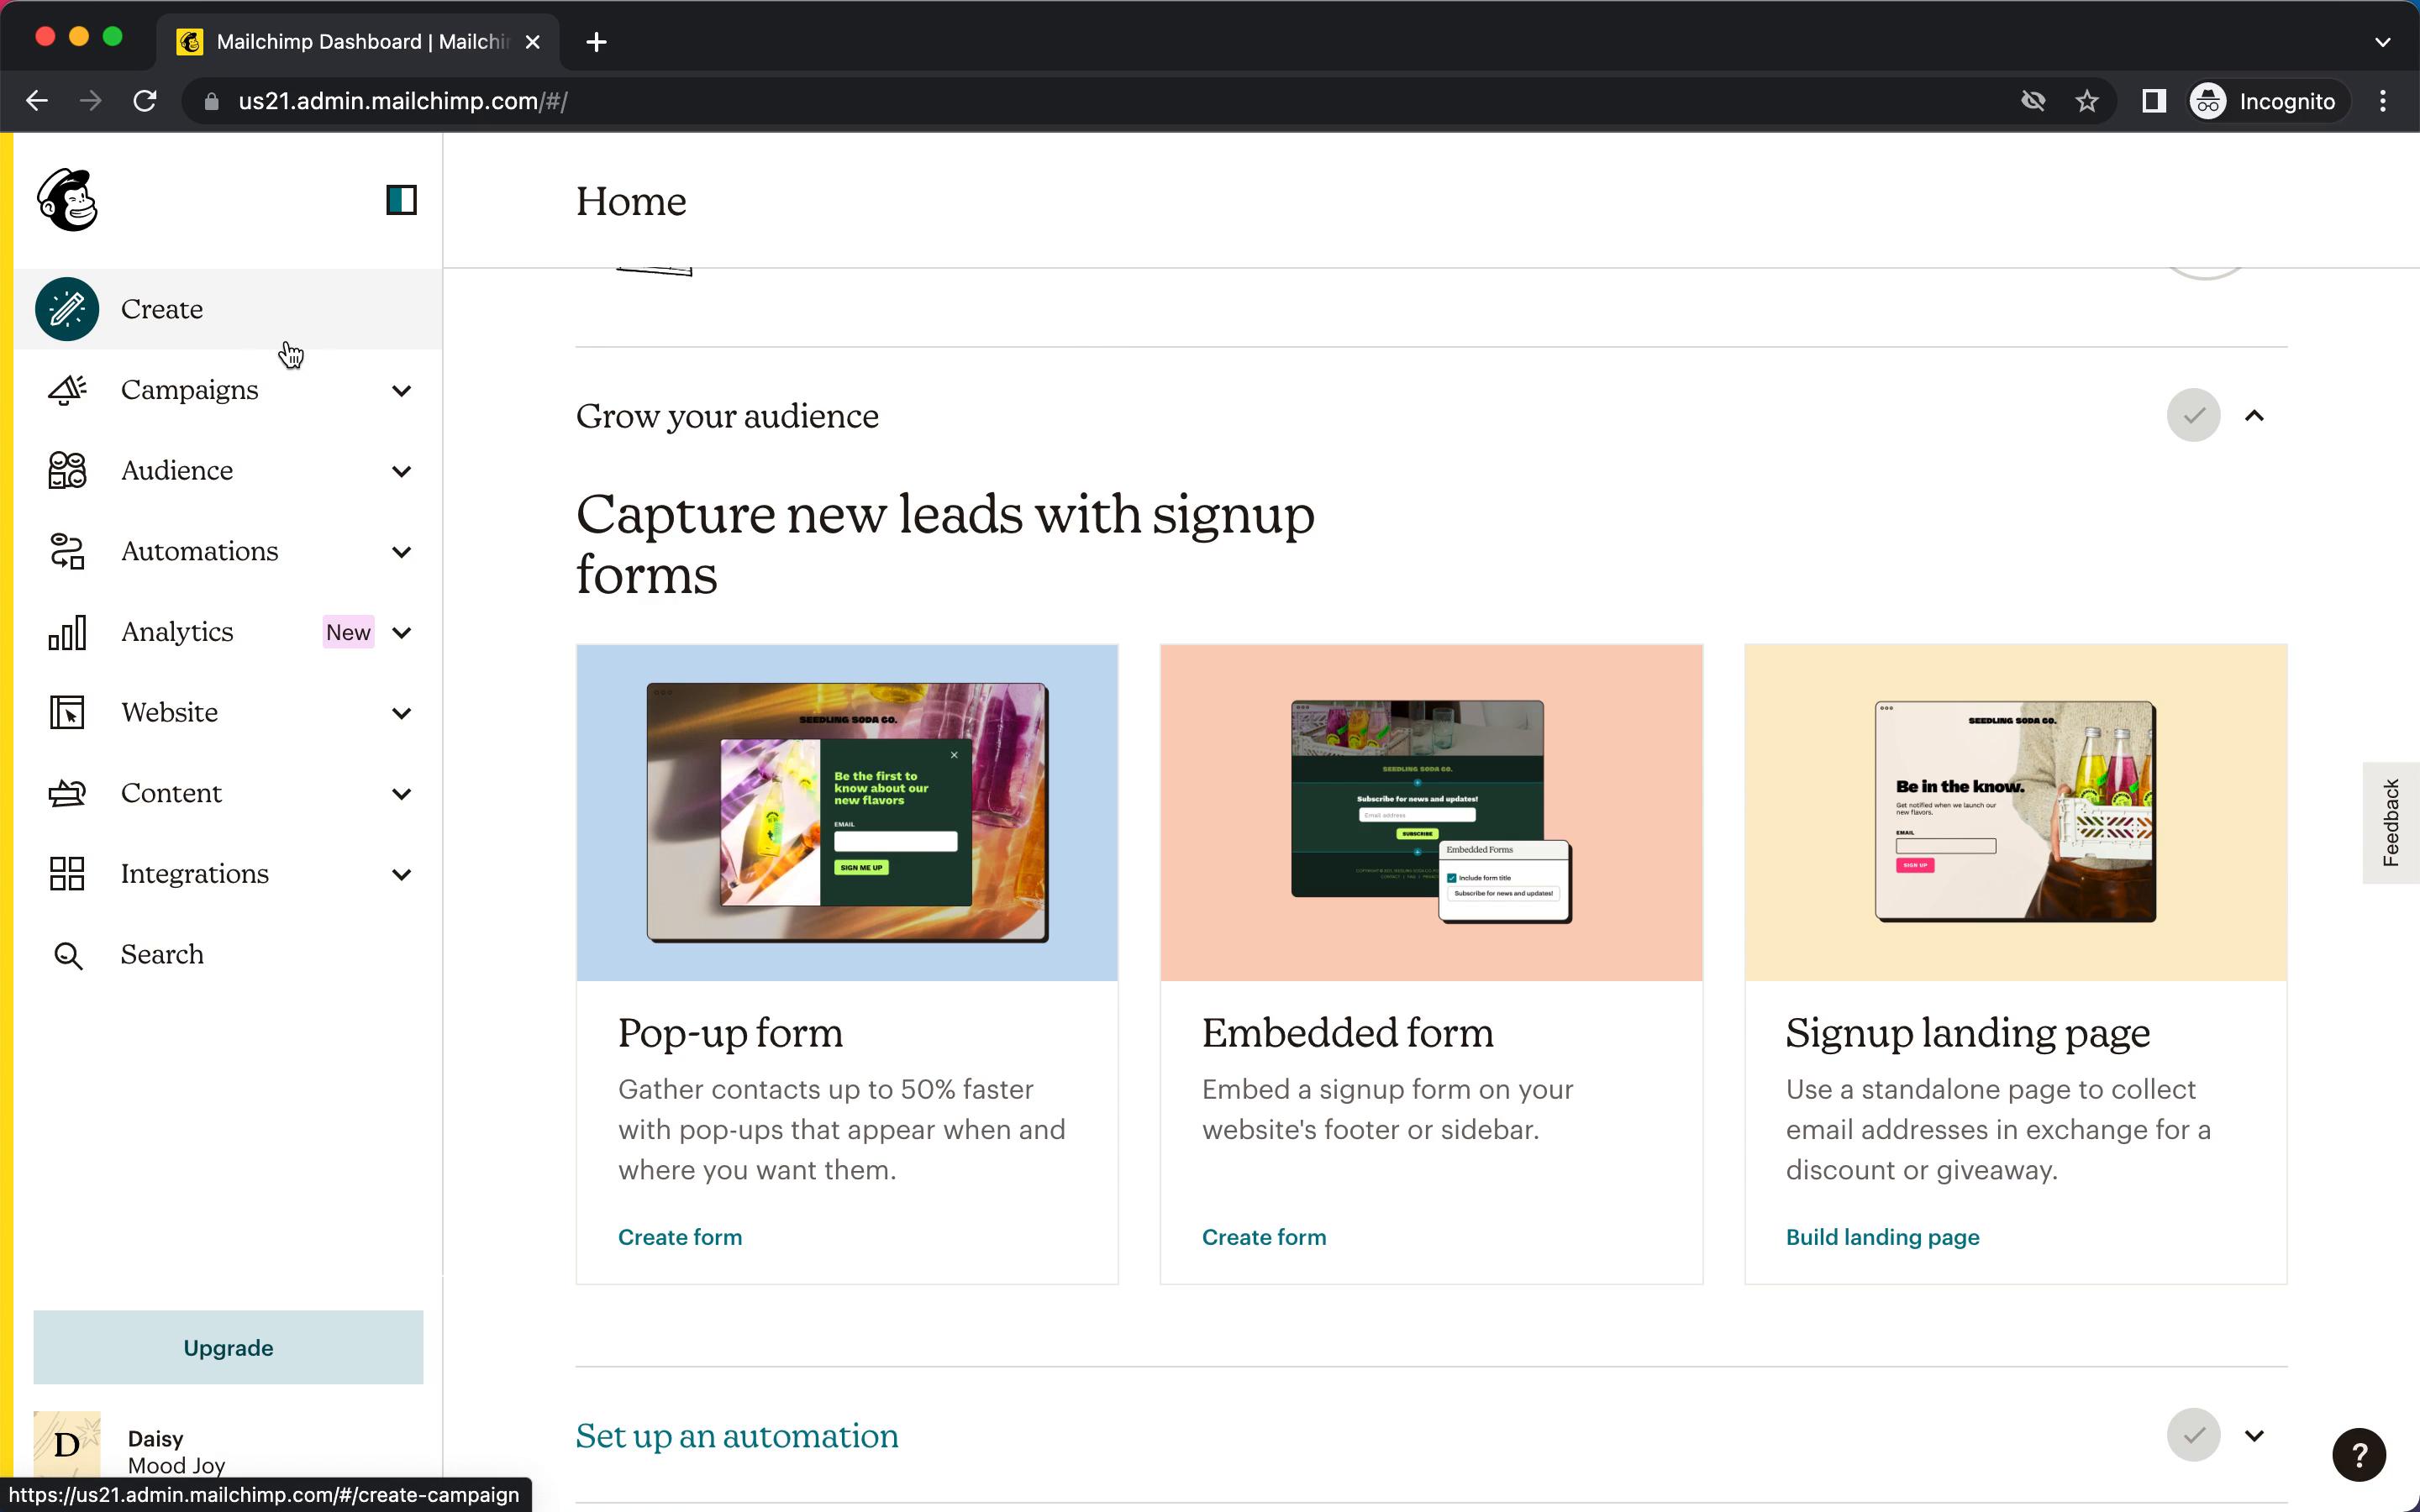 Screenshot of Creating a landing page on Mailchimp